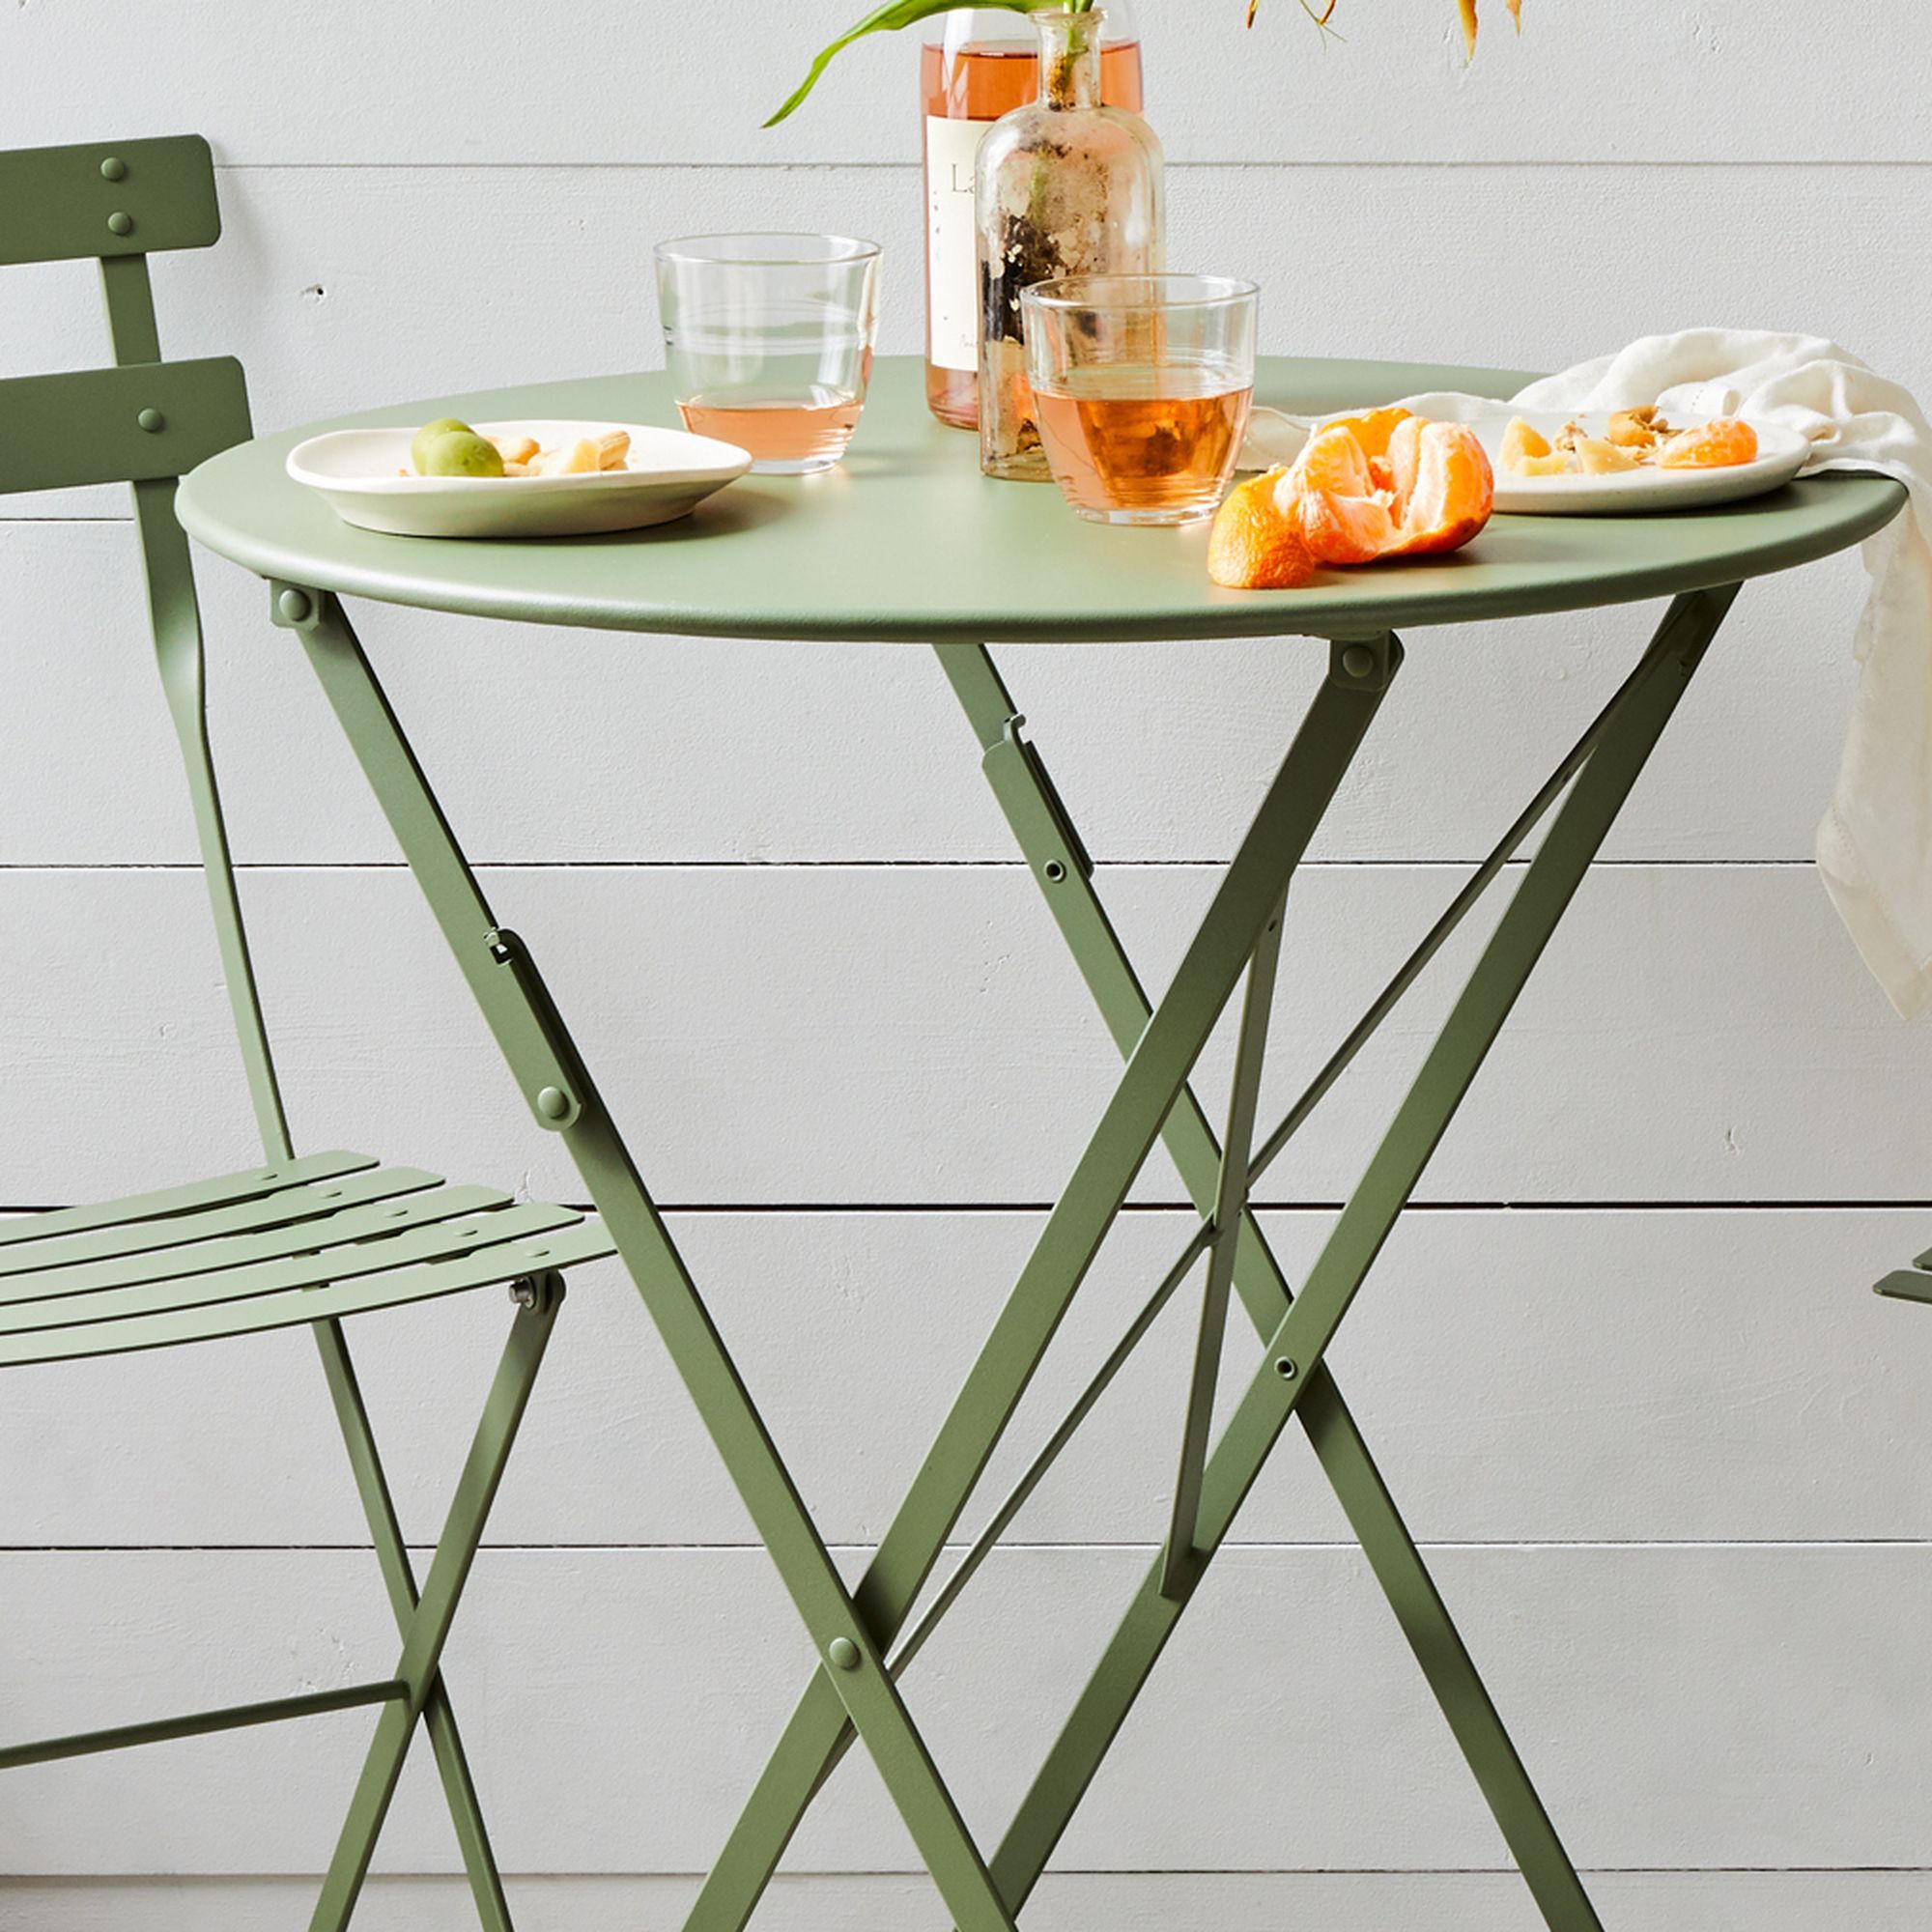 Enhance Your Outdoor Space with a Stylish
Bistro Set